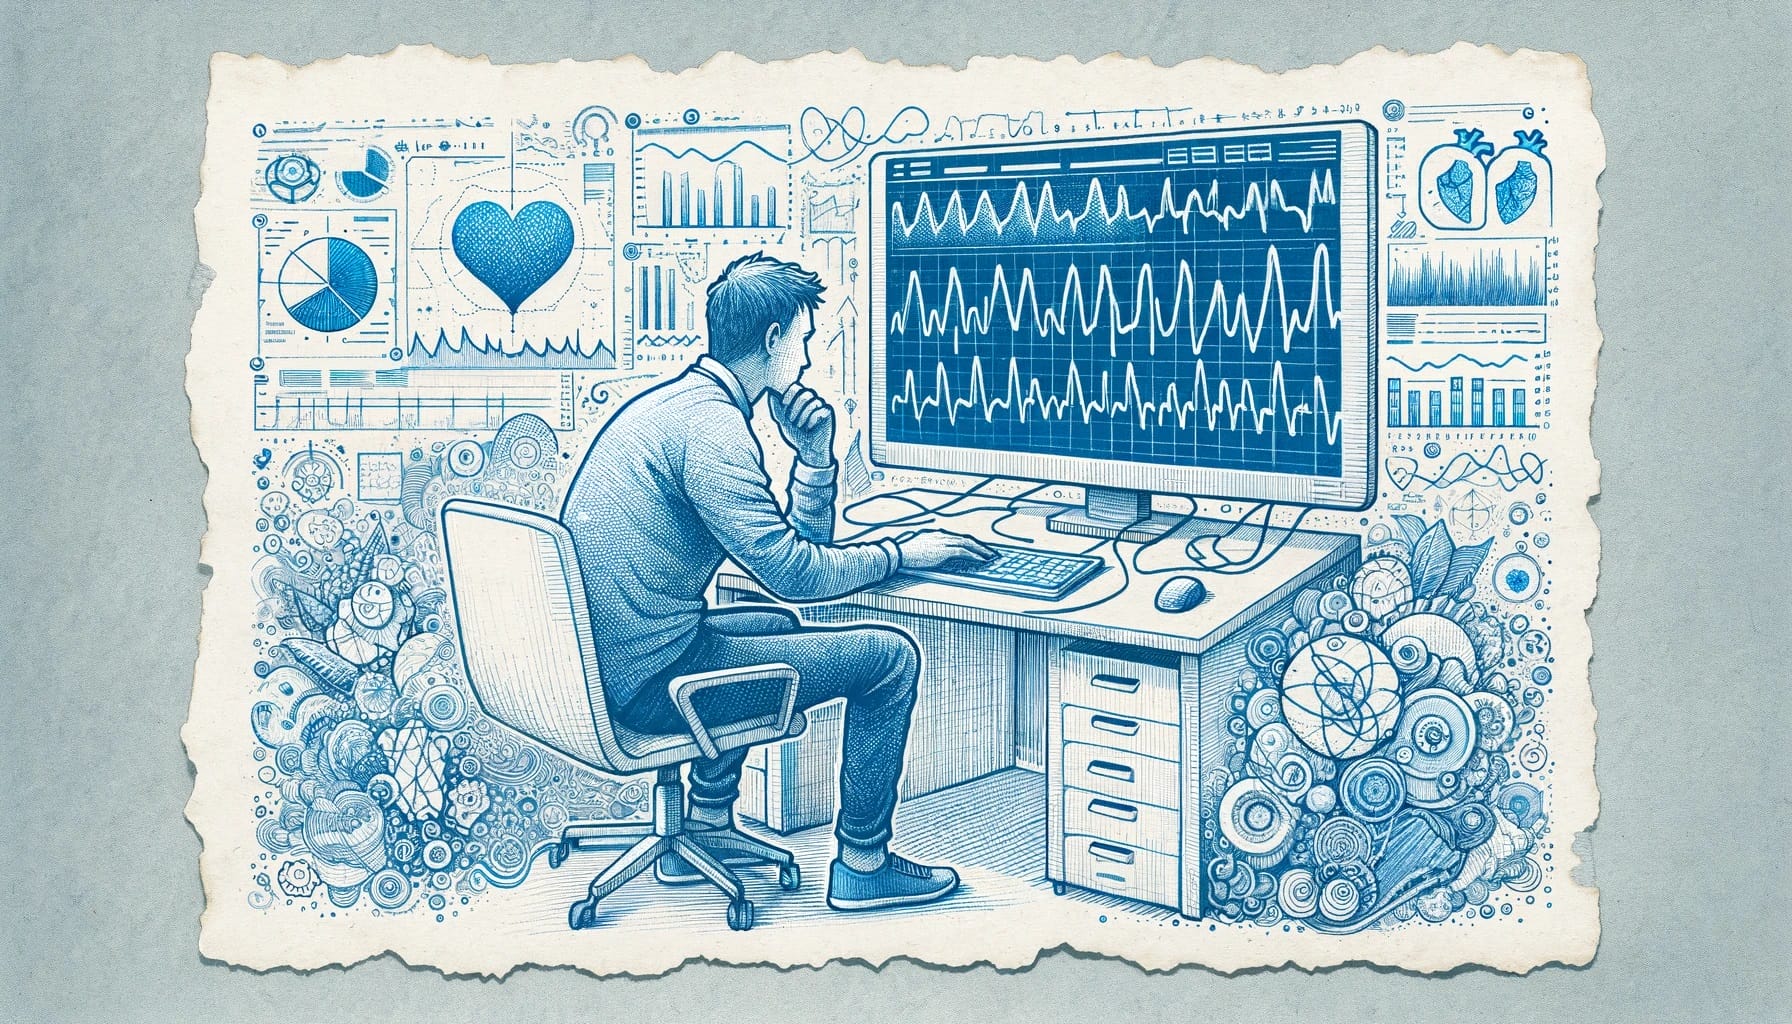 Illustration of a man analyzing complex heart rate variability data on a computer screen surrounded by various charts and mechanical elements in a monochrome, vintage style.